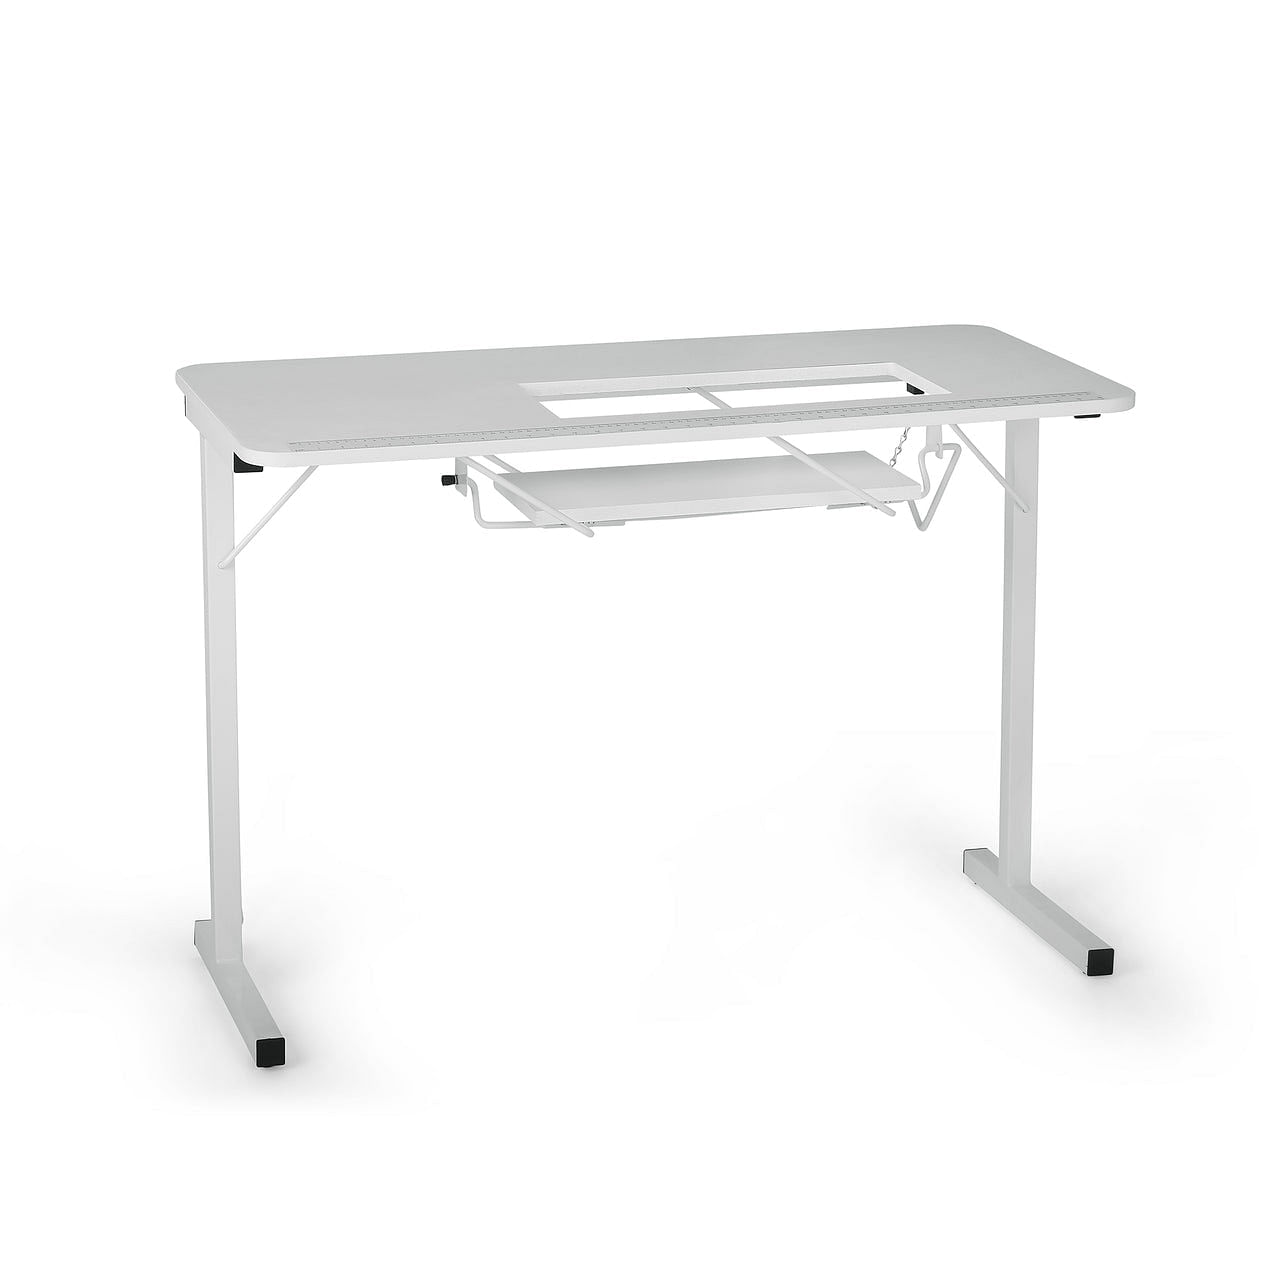 Gidget I Sewing Table by Arrow